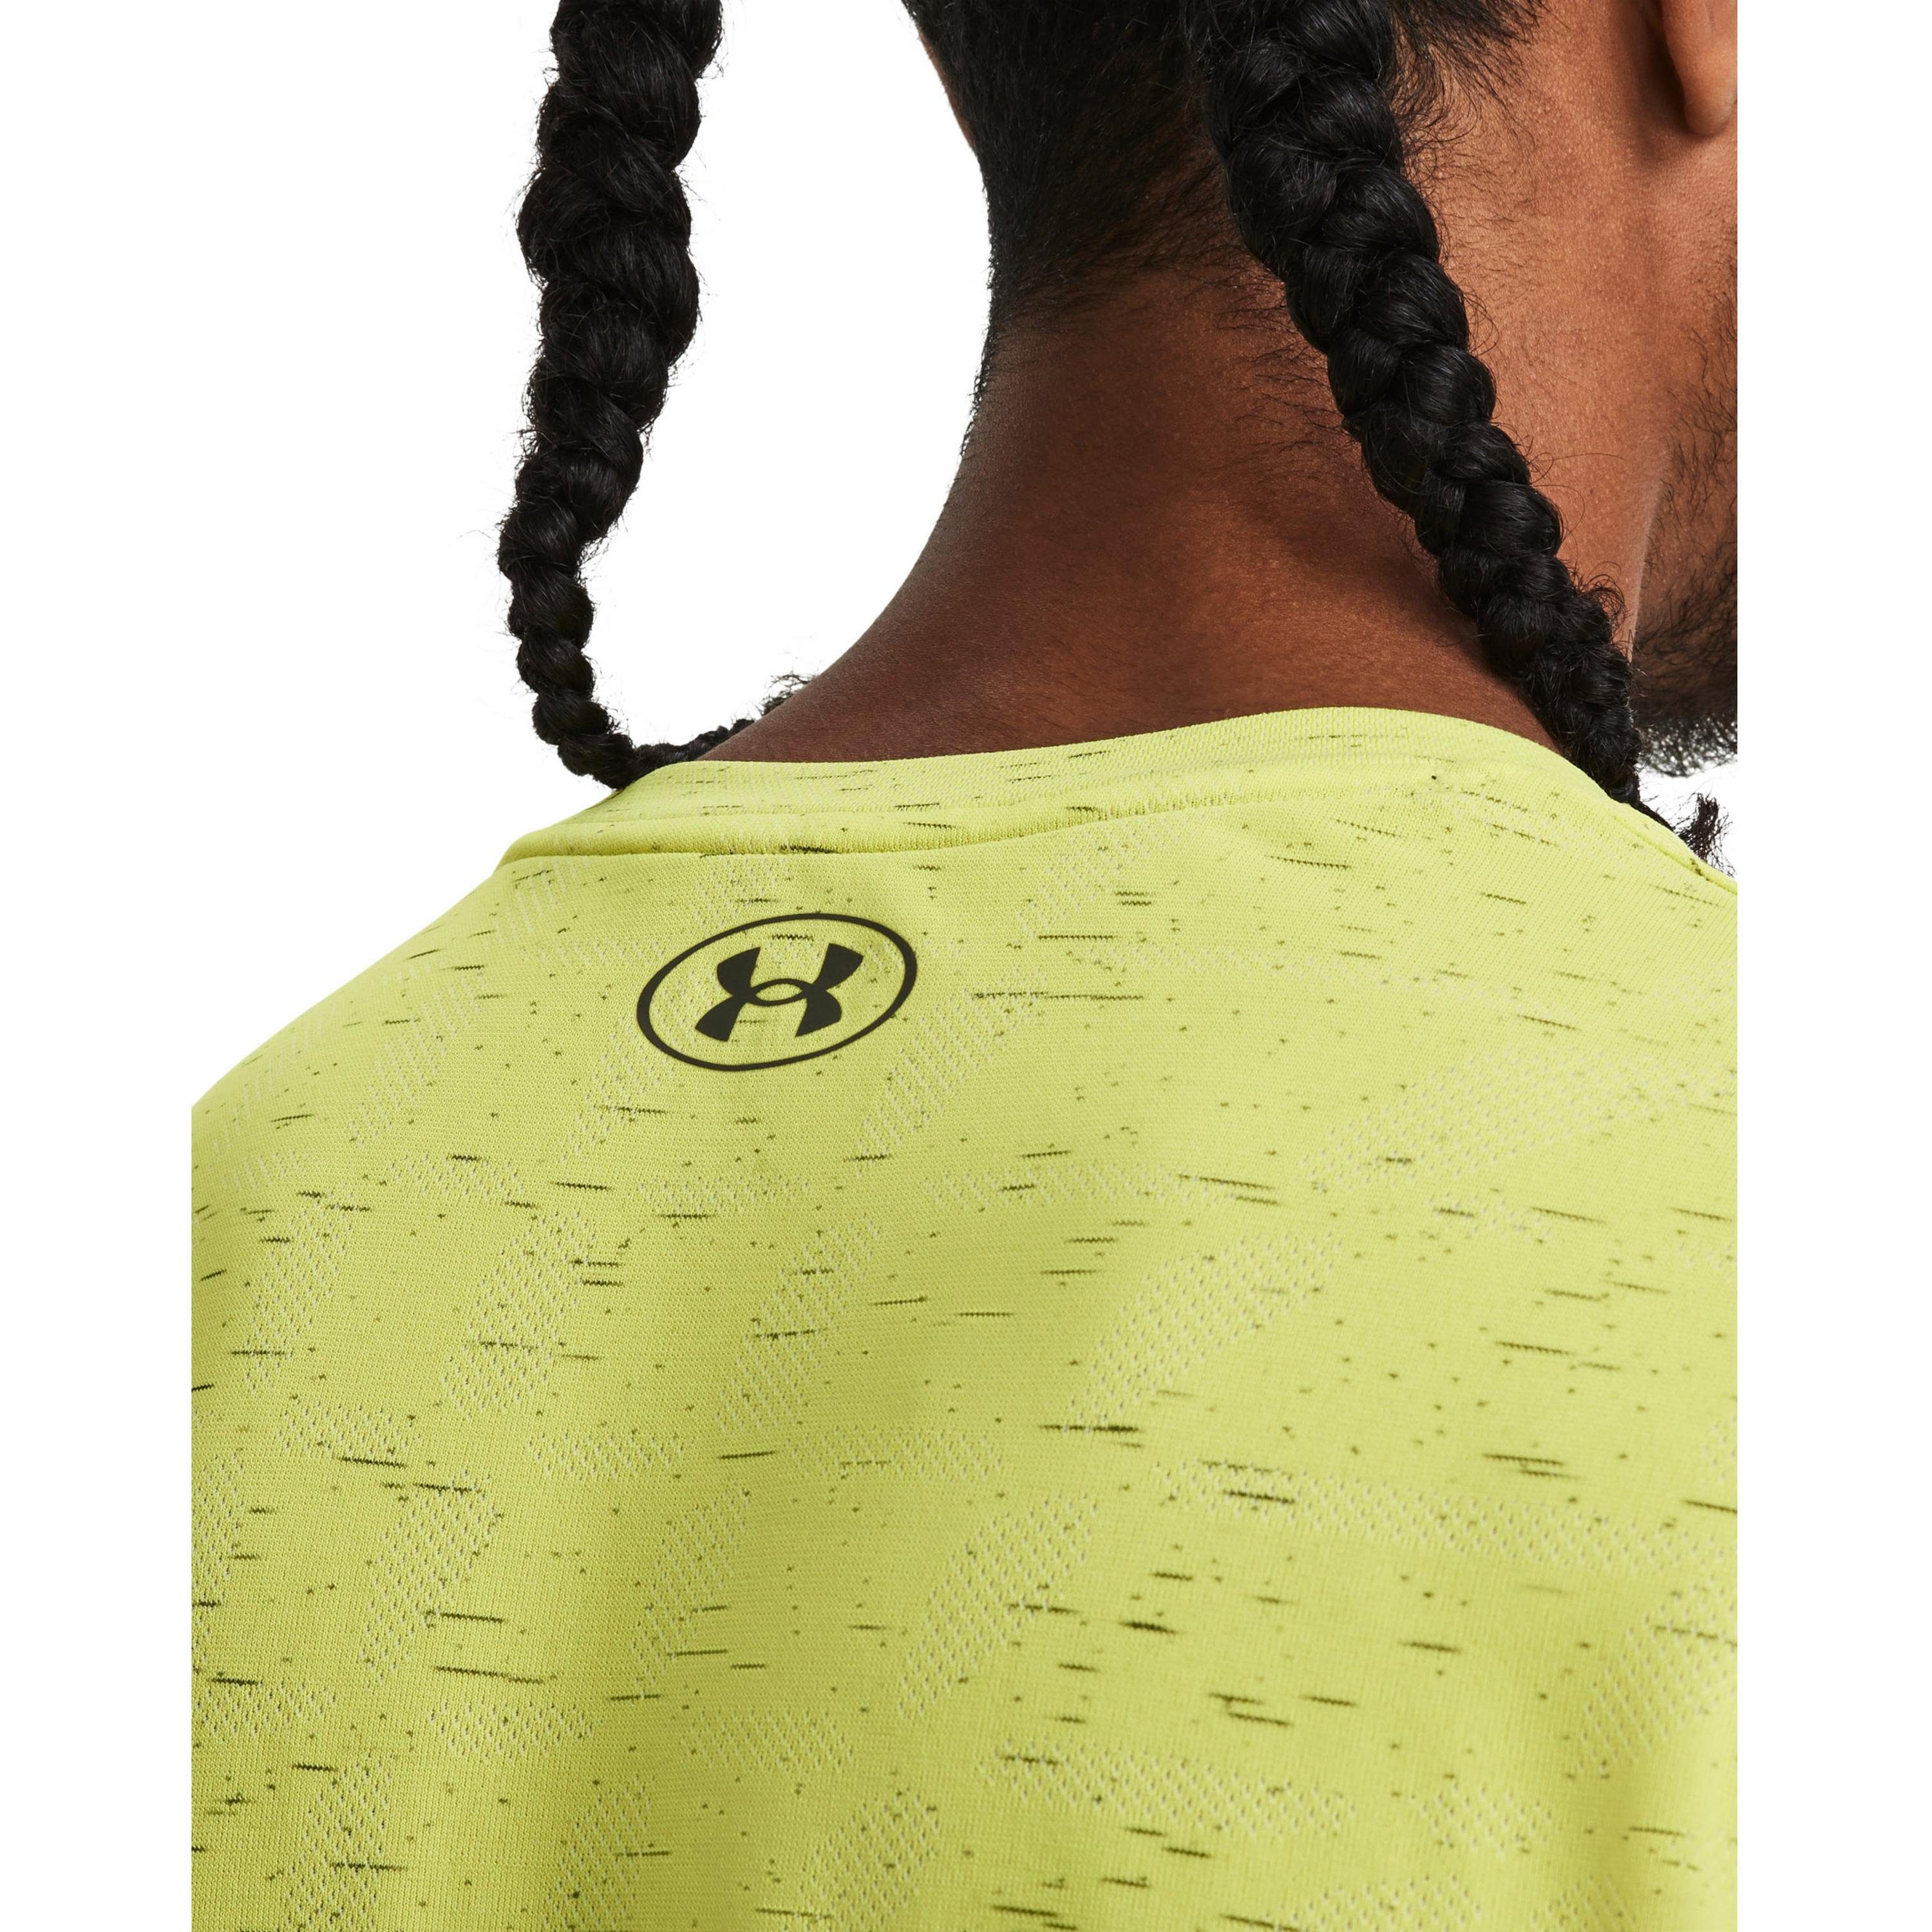 lime Under yellow Seamless Ripple Armour® Funktionsshirt